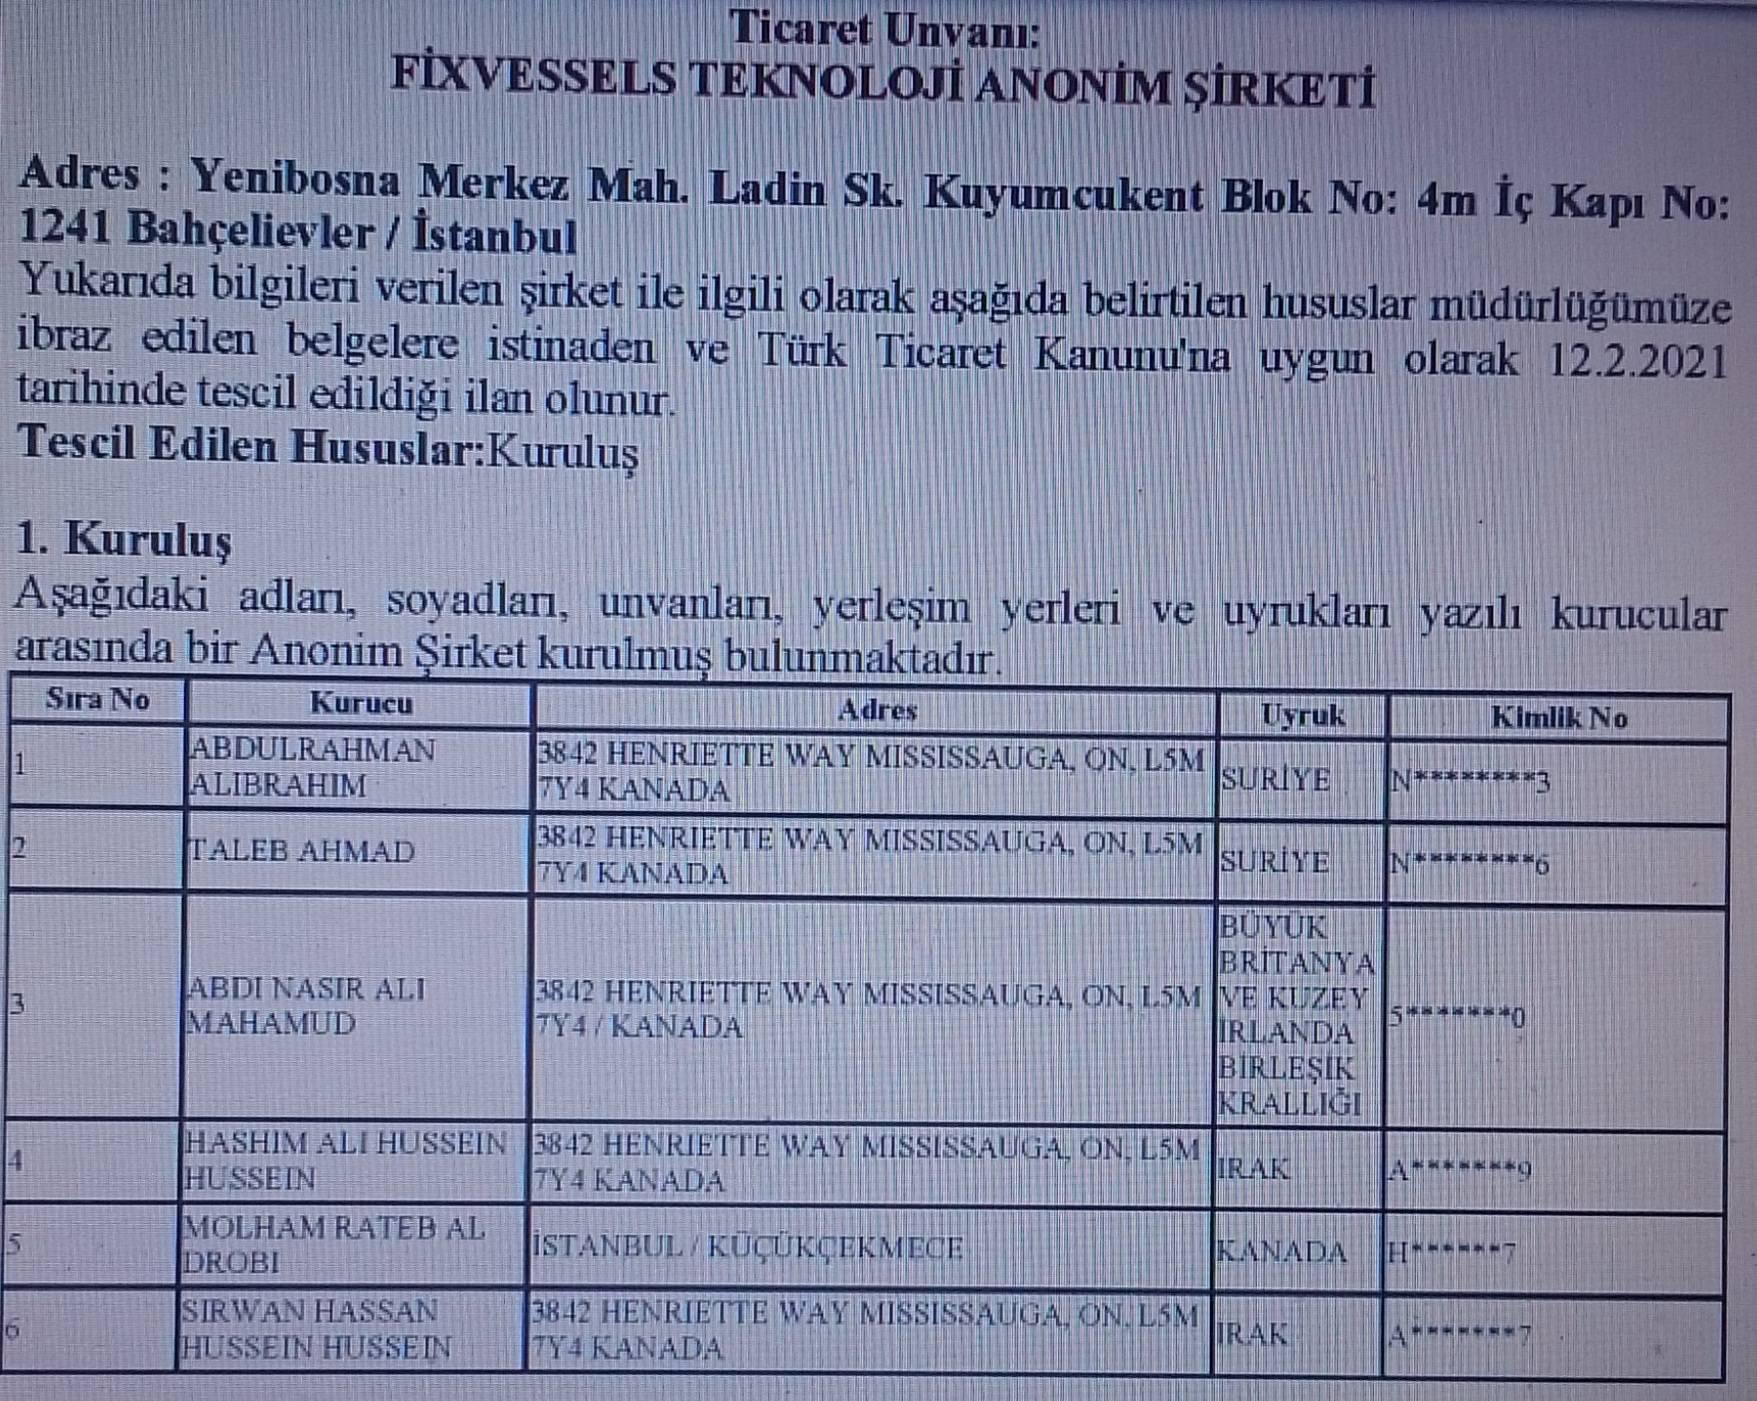 ifmat - Fixvessels Teknologi Anonim Sirketi owned or controlled by US sanctioned entities